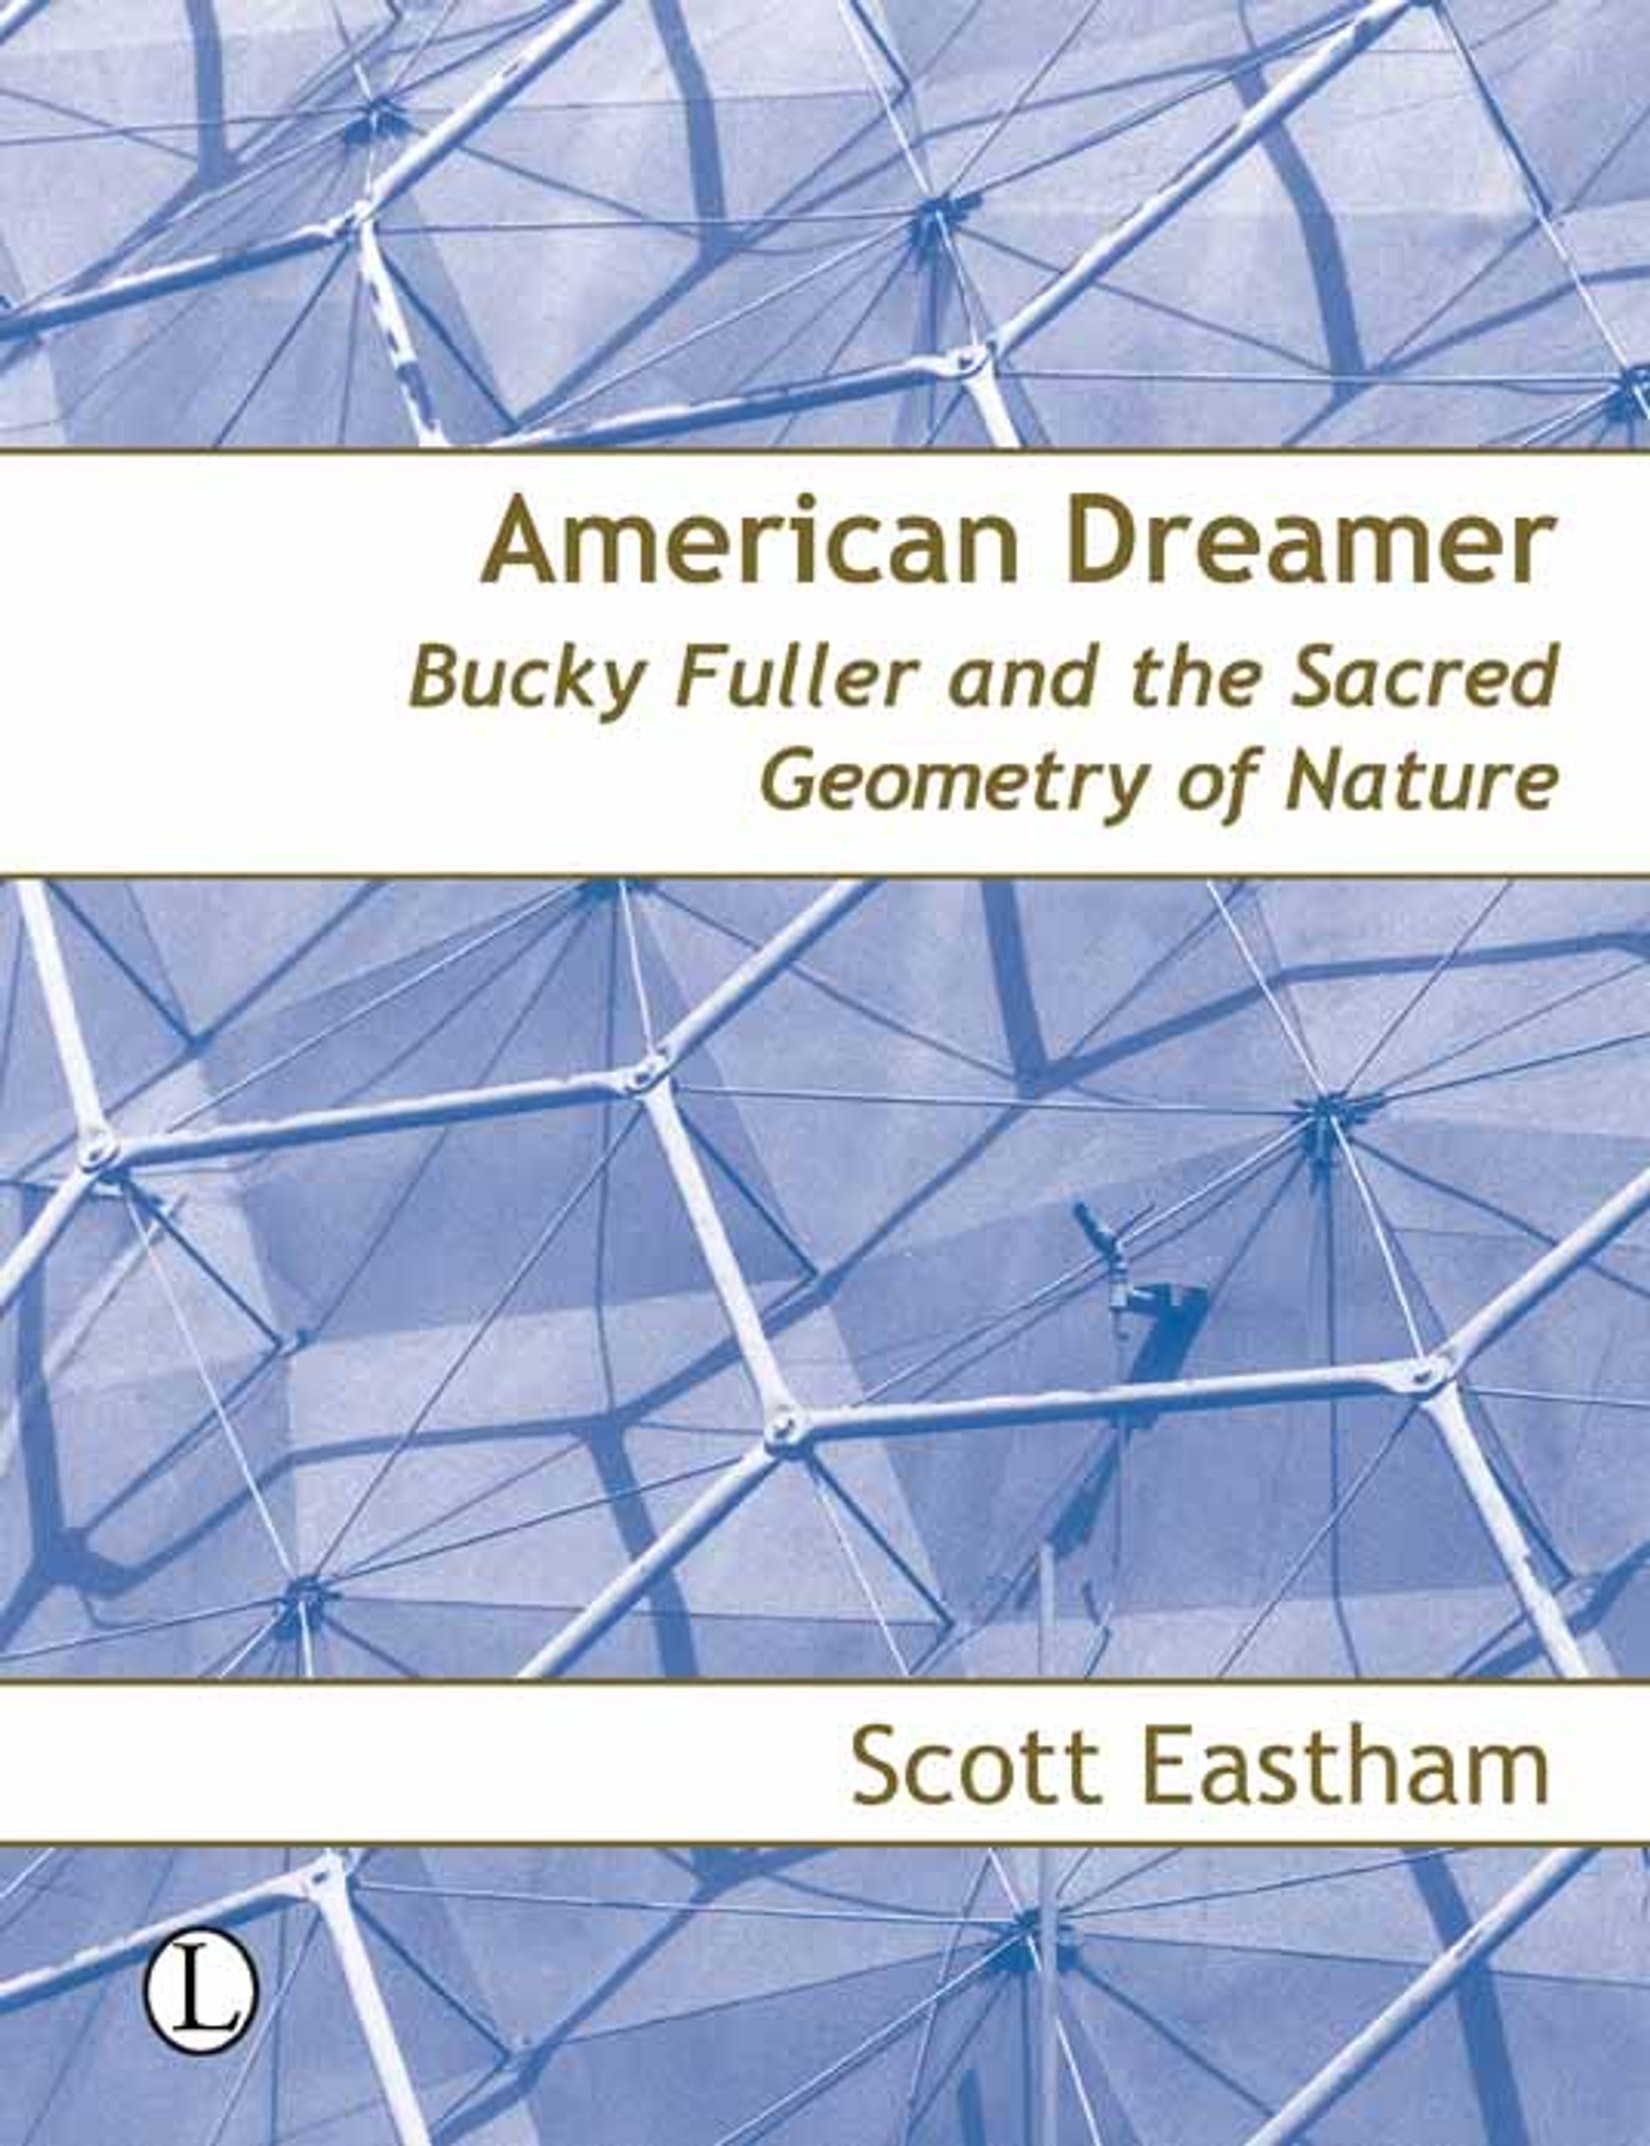 American Dreamer: Bucky Fuller and the Sacred Geometry of Nature